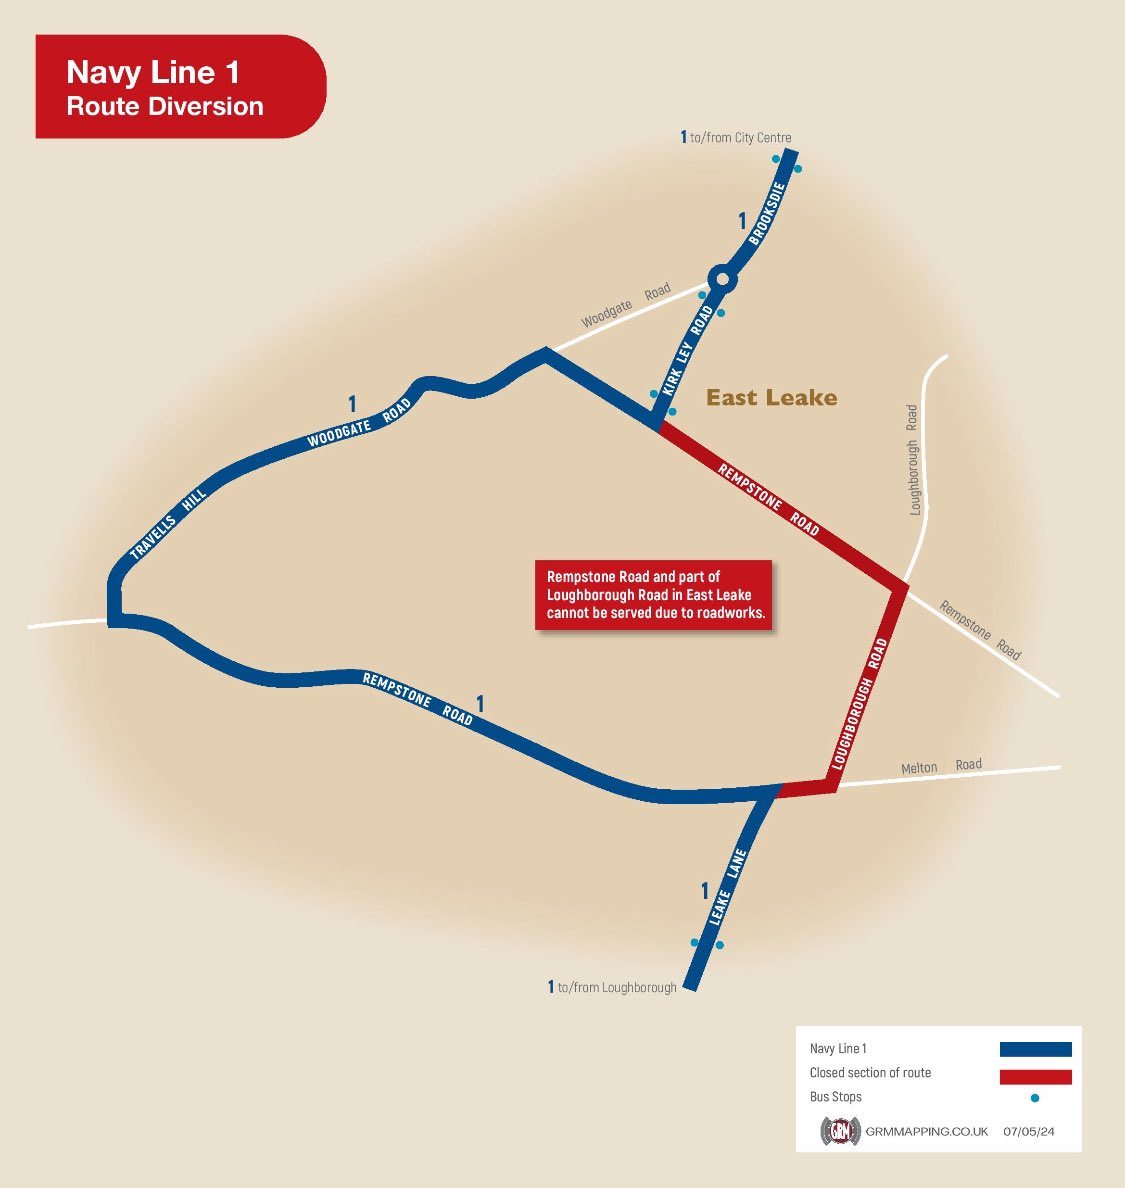 Loughborough Road in East Leake will be closed for works from 13th May-22nd May from 07:30-16:00 each day. South Notts 1 will divert in both ways via Woodgate Rd, Travell’s Hill & Melton Rd. Stops missed are; Elizabeth Drive, Rempstone Road & Melton Road nctx.co.uk/service-updates